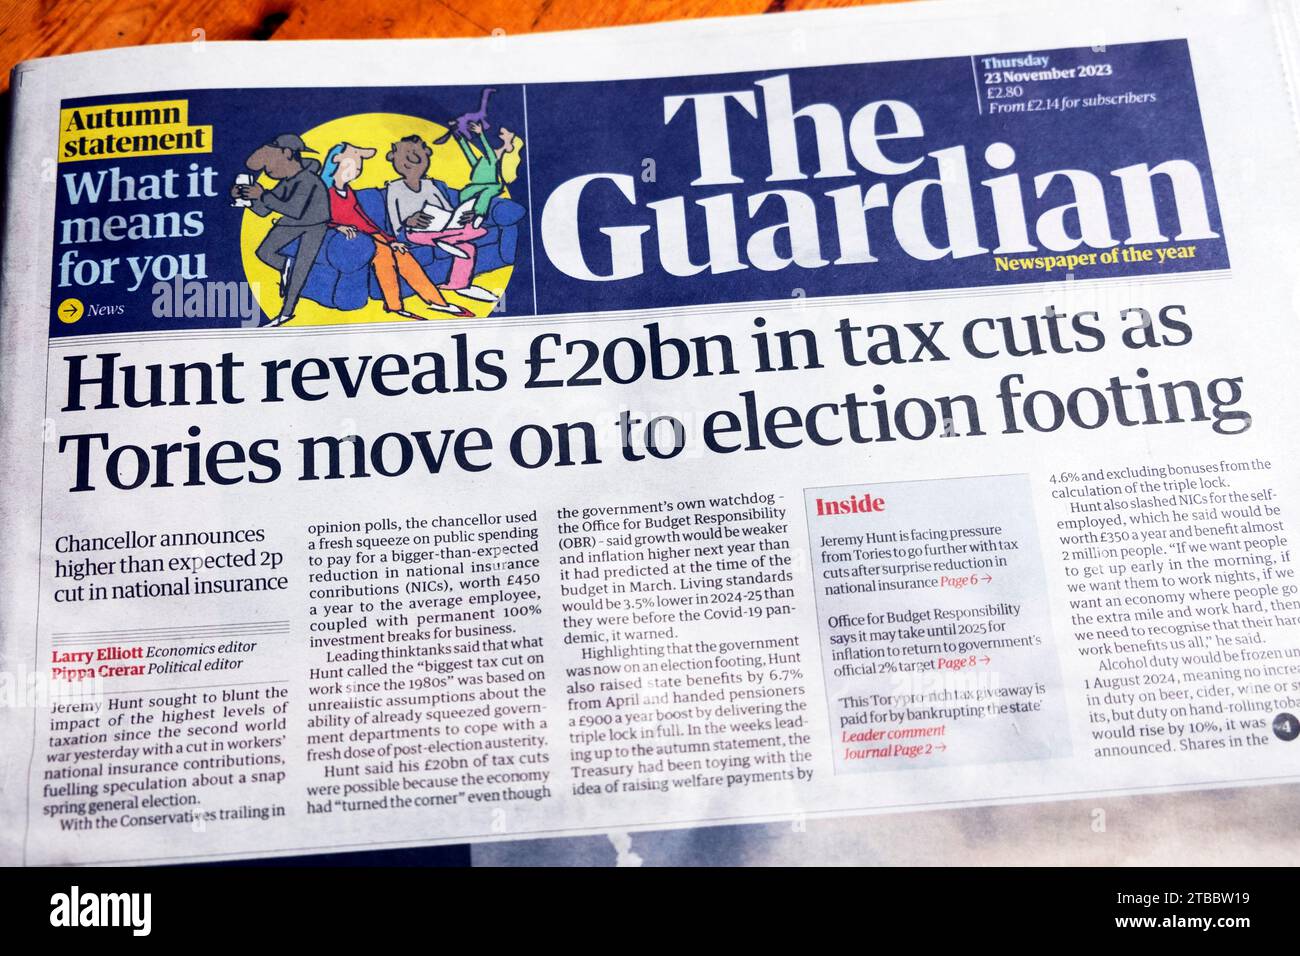 Jeremy 'Hunt reveals £20bn in tax cuts as Tories move onto election footing' Guardian newspaper headline British economy 21 November 2023 London UK Stock Photo